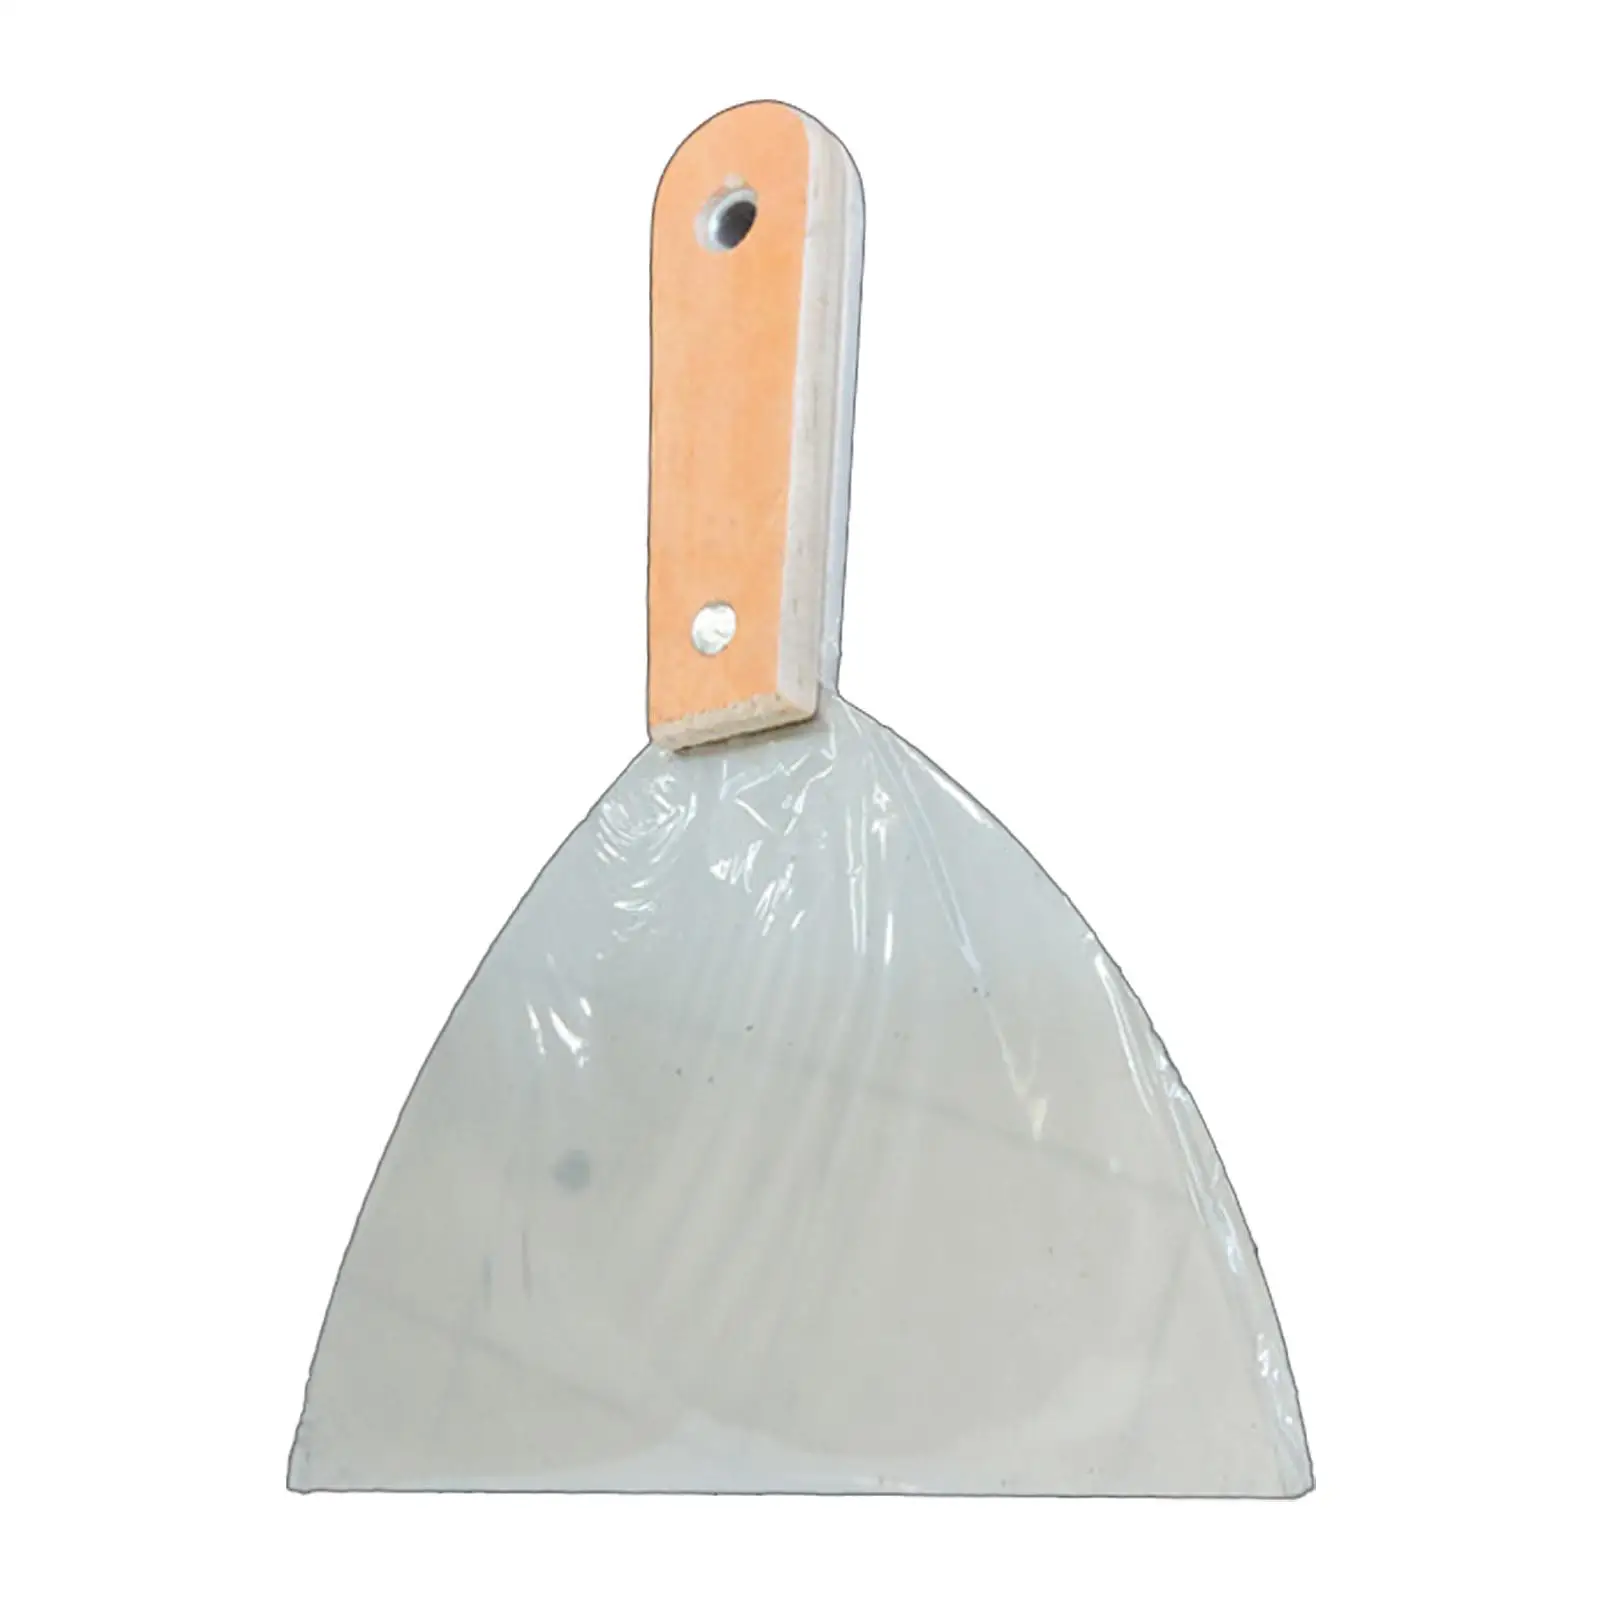 Pigeon Loft Cleaning Scraper Shovel Cleaning Supplies Portable Stainless Steel Handheld for Pigeon Supplies Clean Scraper Shovel